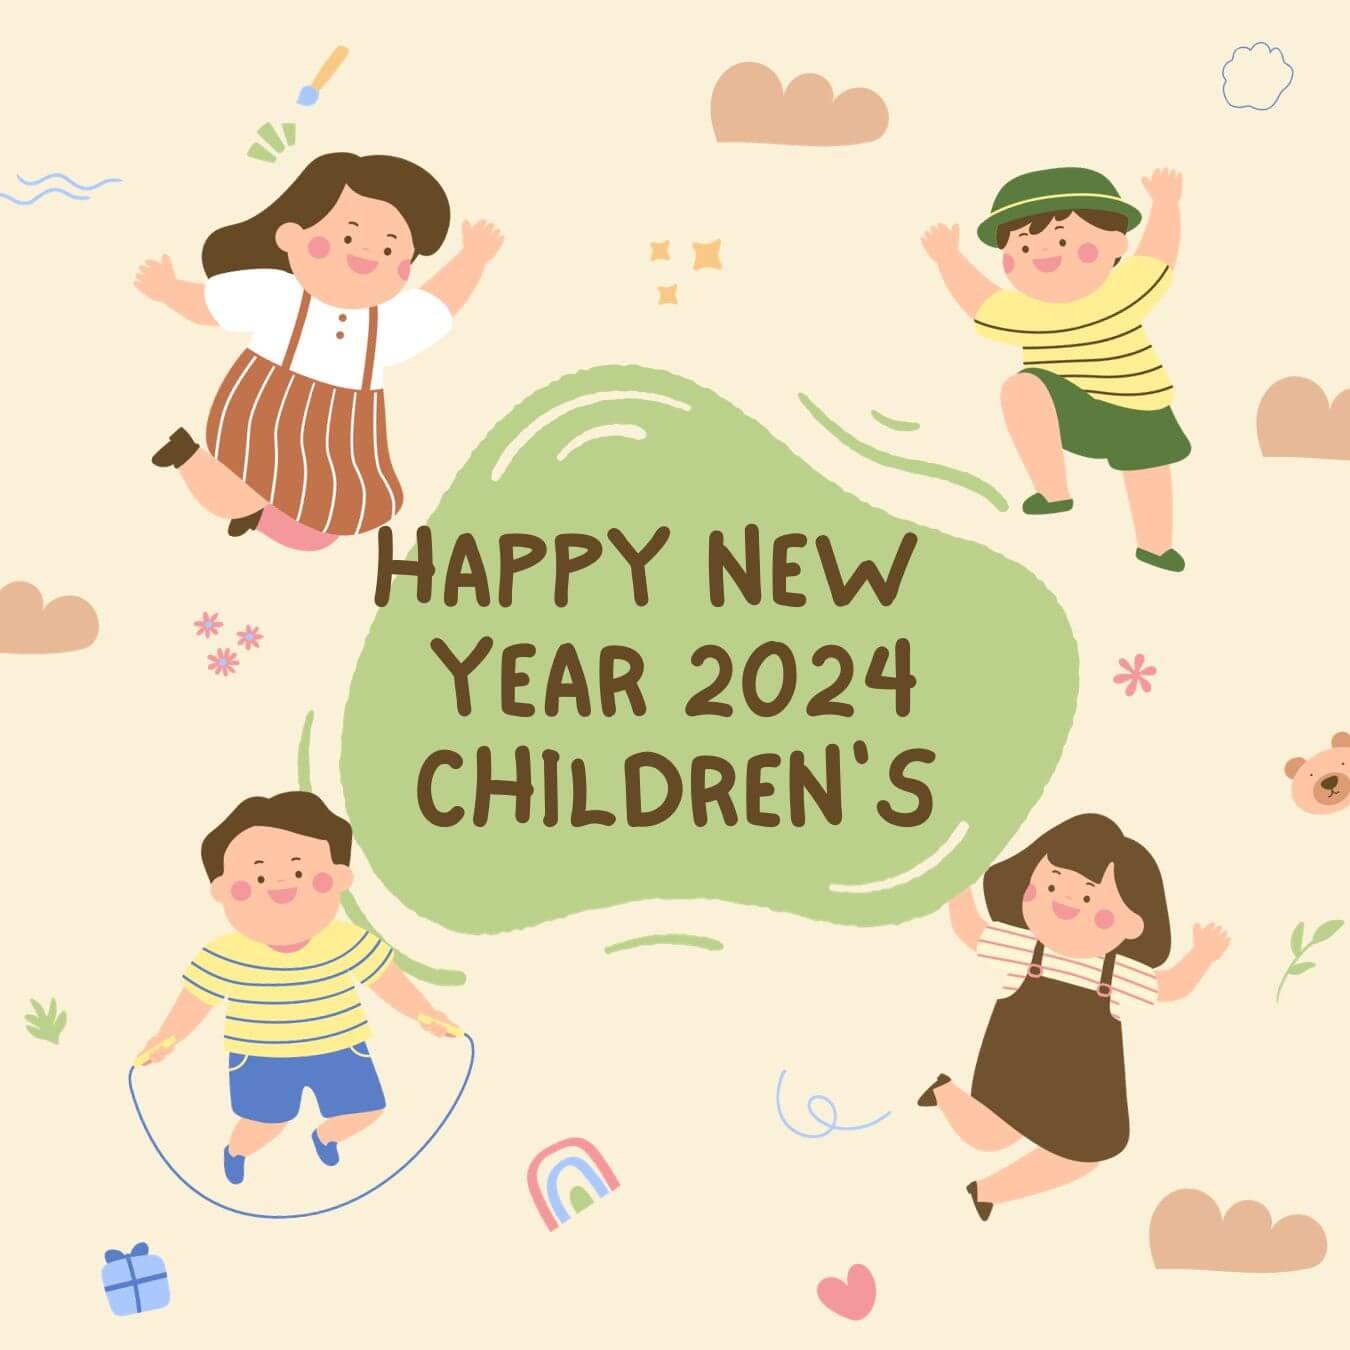 Happy New Year Wishes For Children's 2024